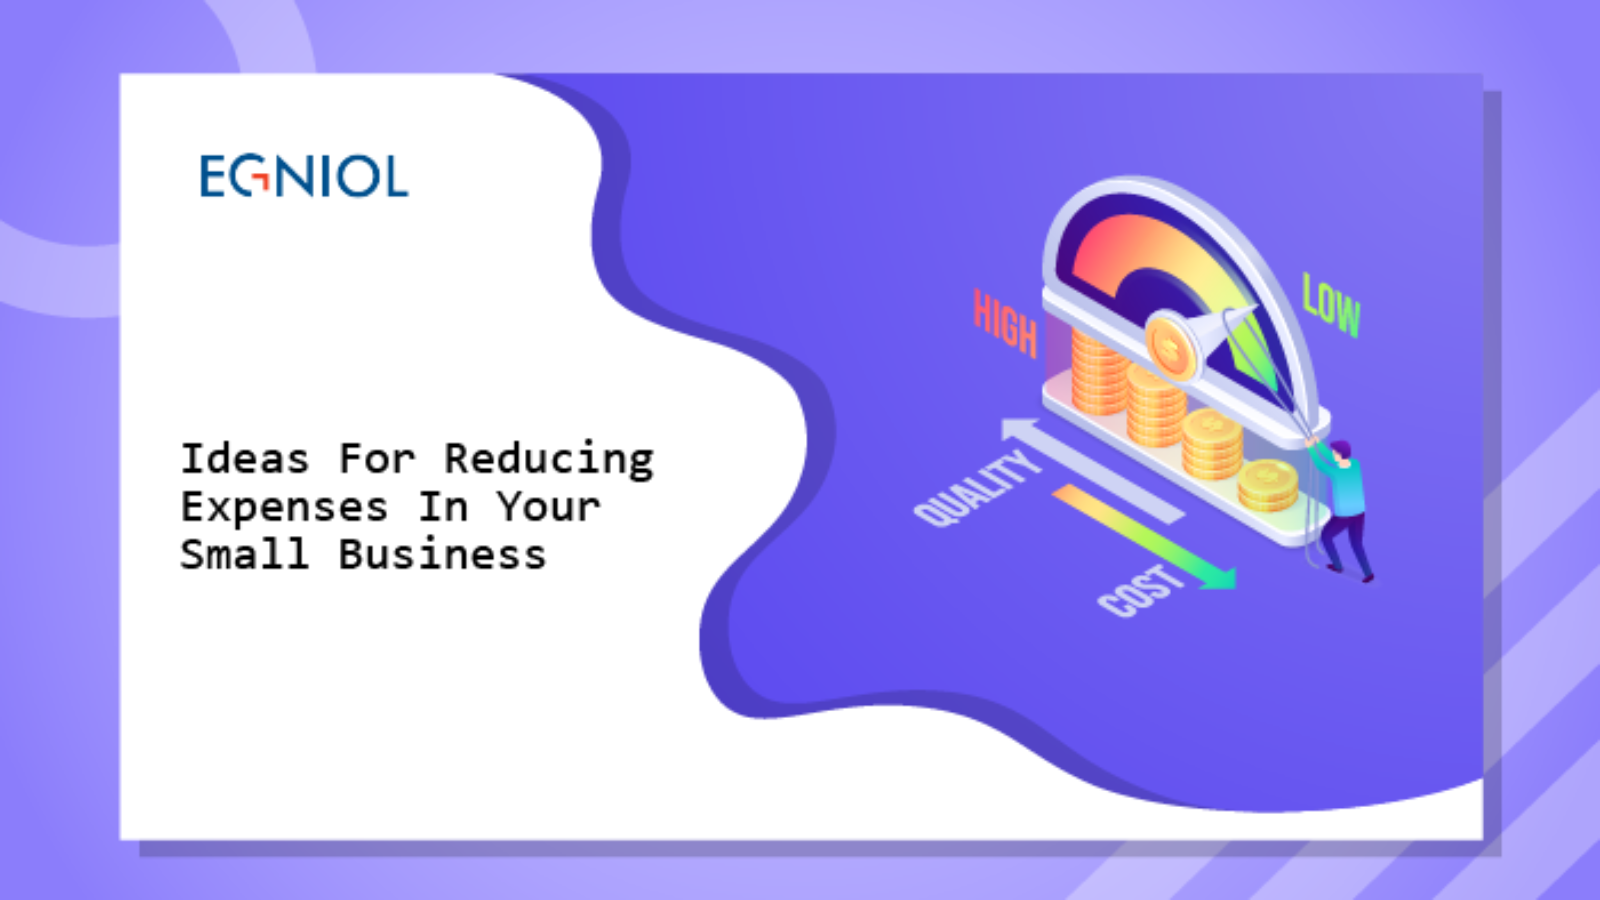 Ideas For Reducing Expenses In Your Small Business - By Egniol